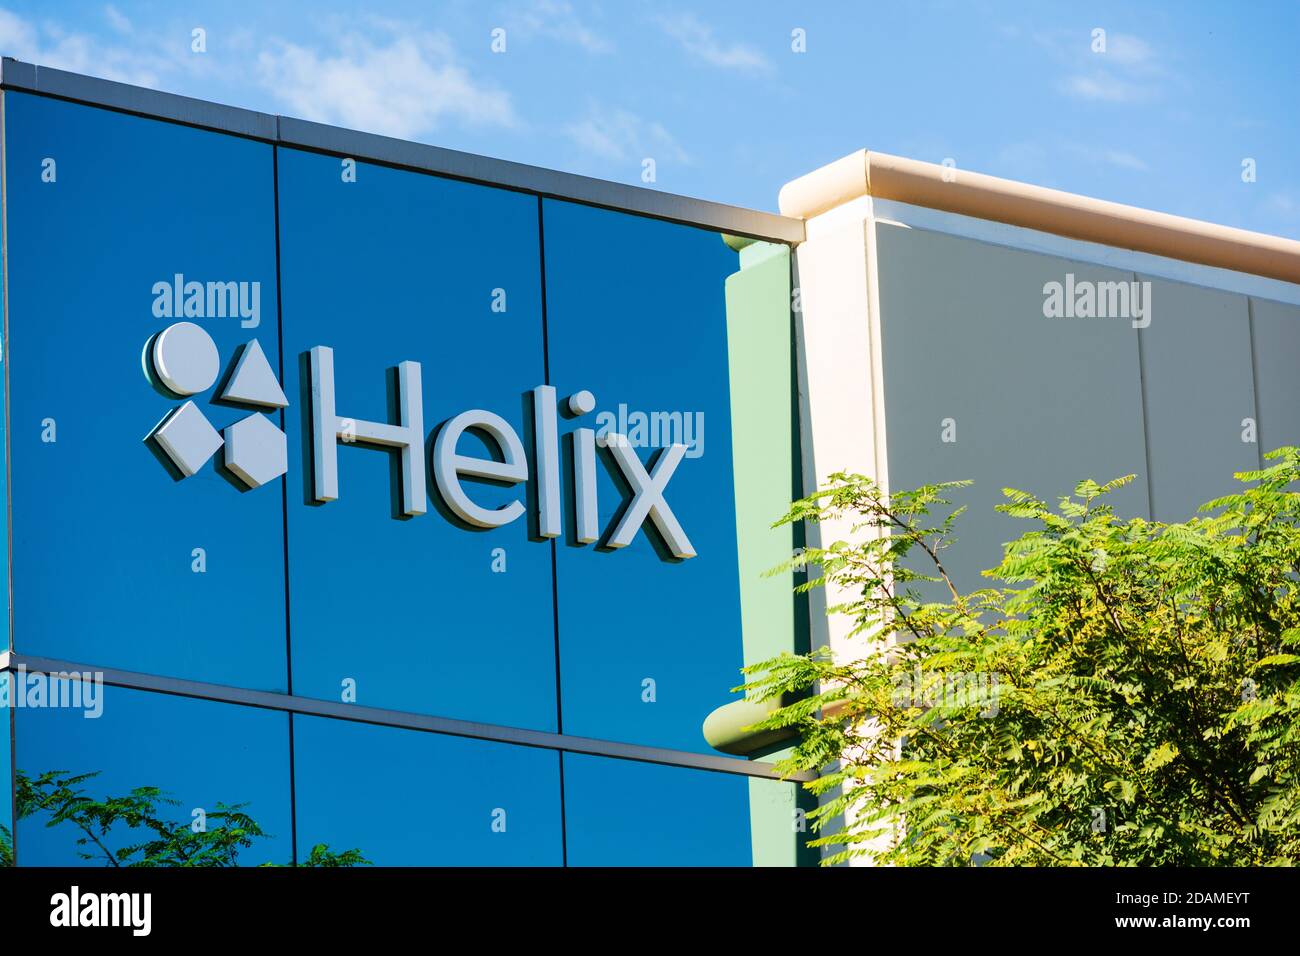 Helix logo sign on campus building. Helix Opco is part of the biotechnology research services industry - San Diego, California, USA - 2020 Stock Photo